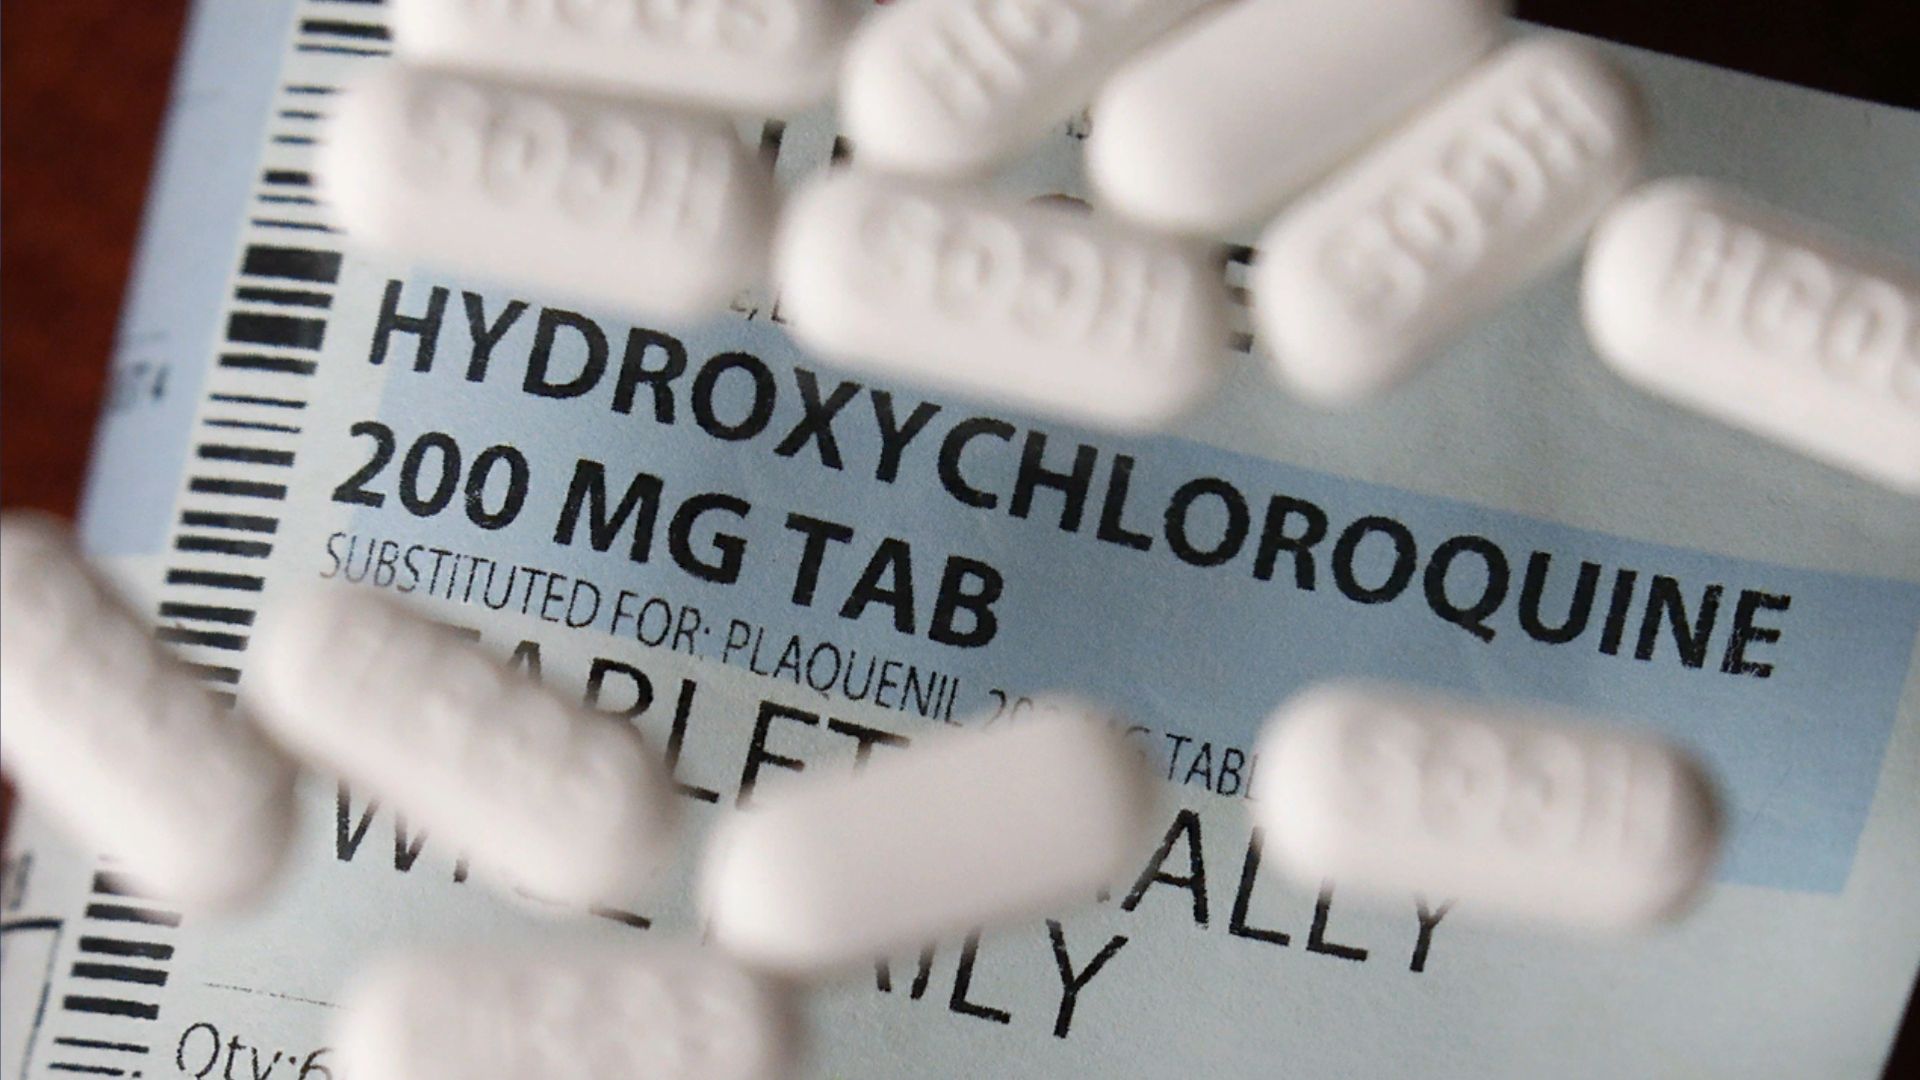 Sen Ron Johnson Pushes For Increased Access To Hydroxychloroquine Images, Photos, Reviews